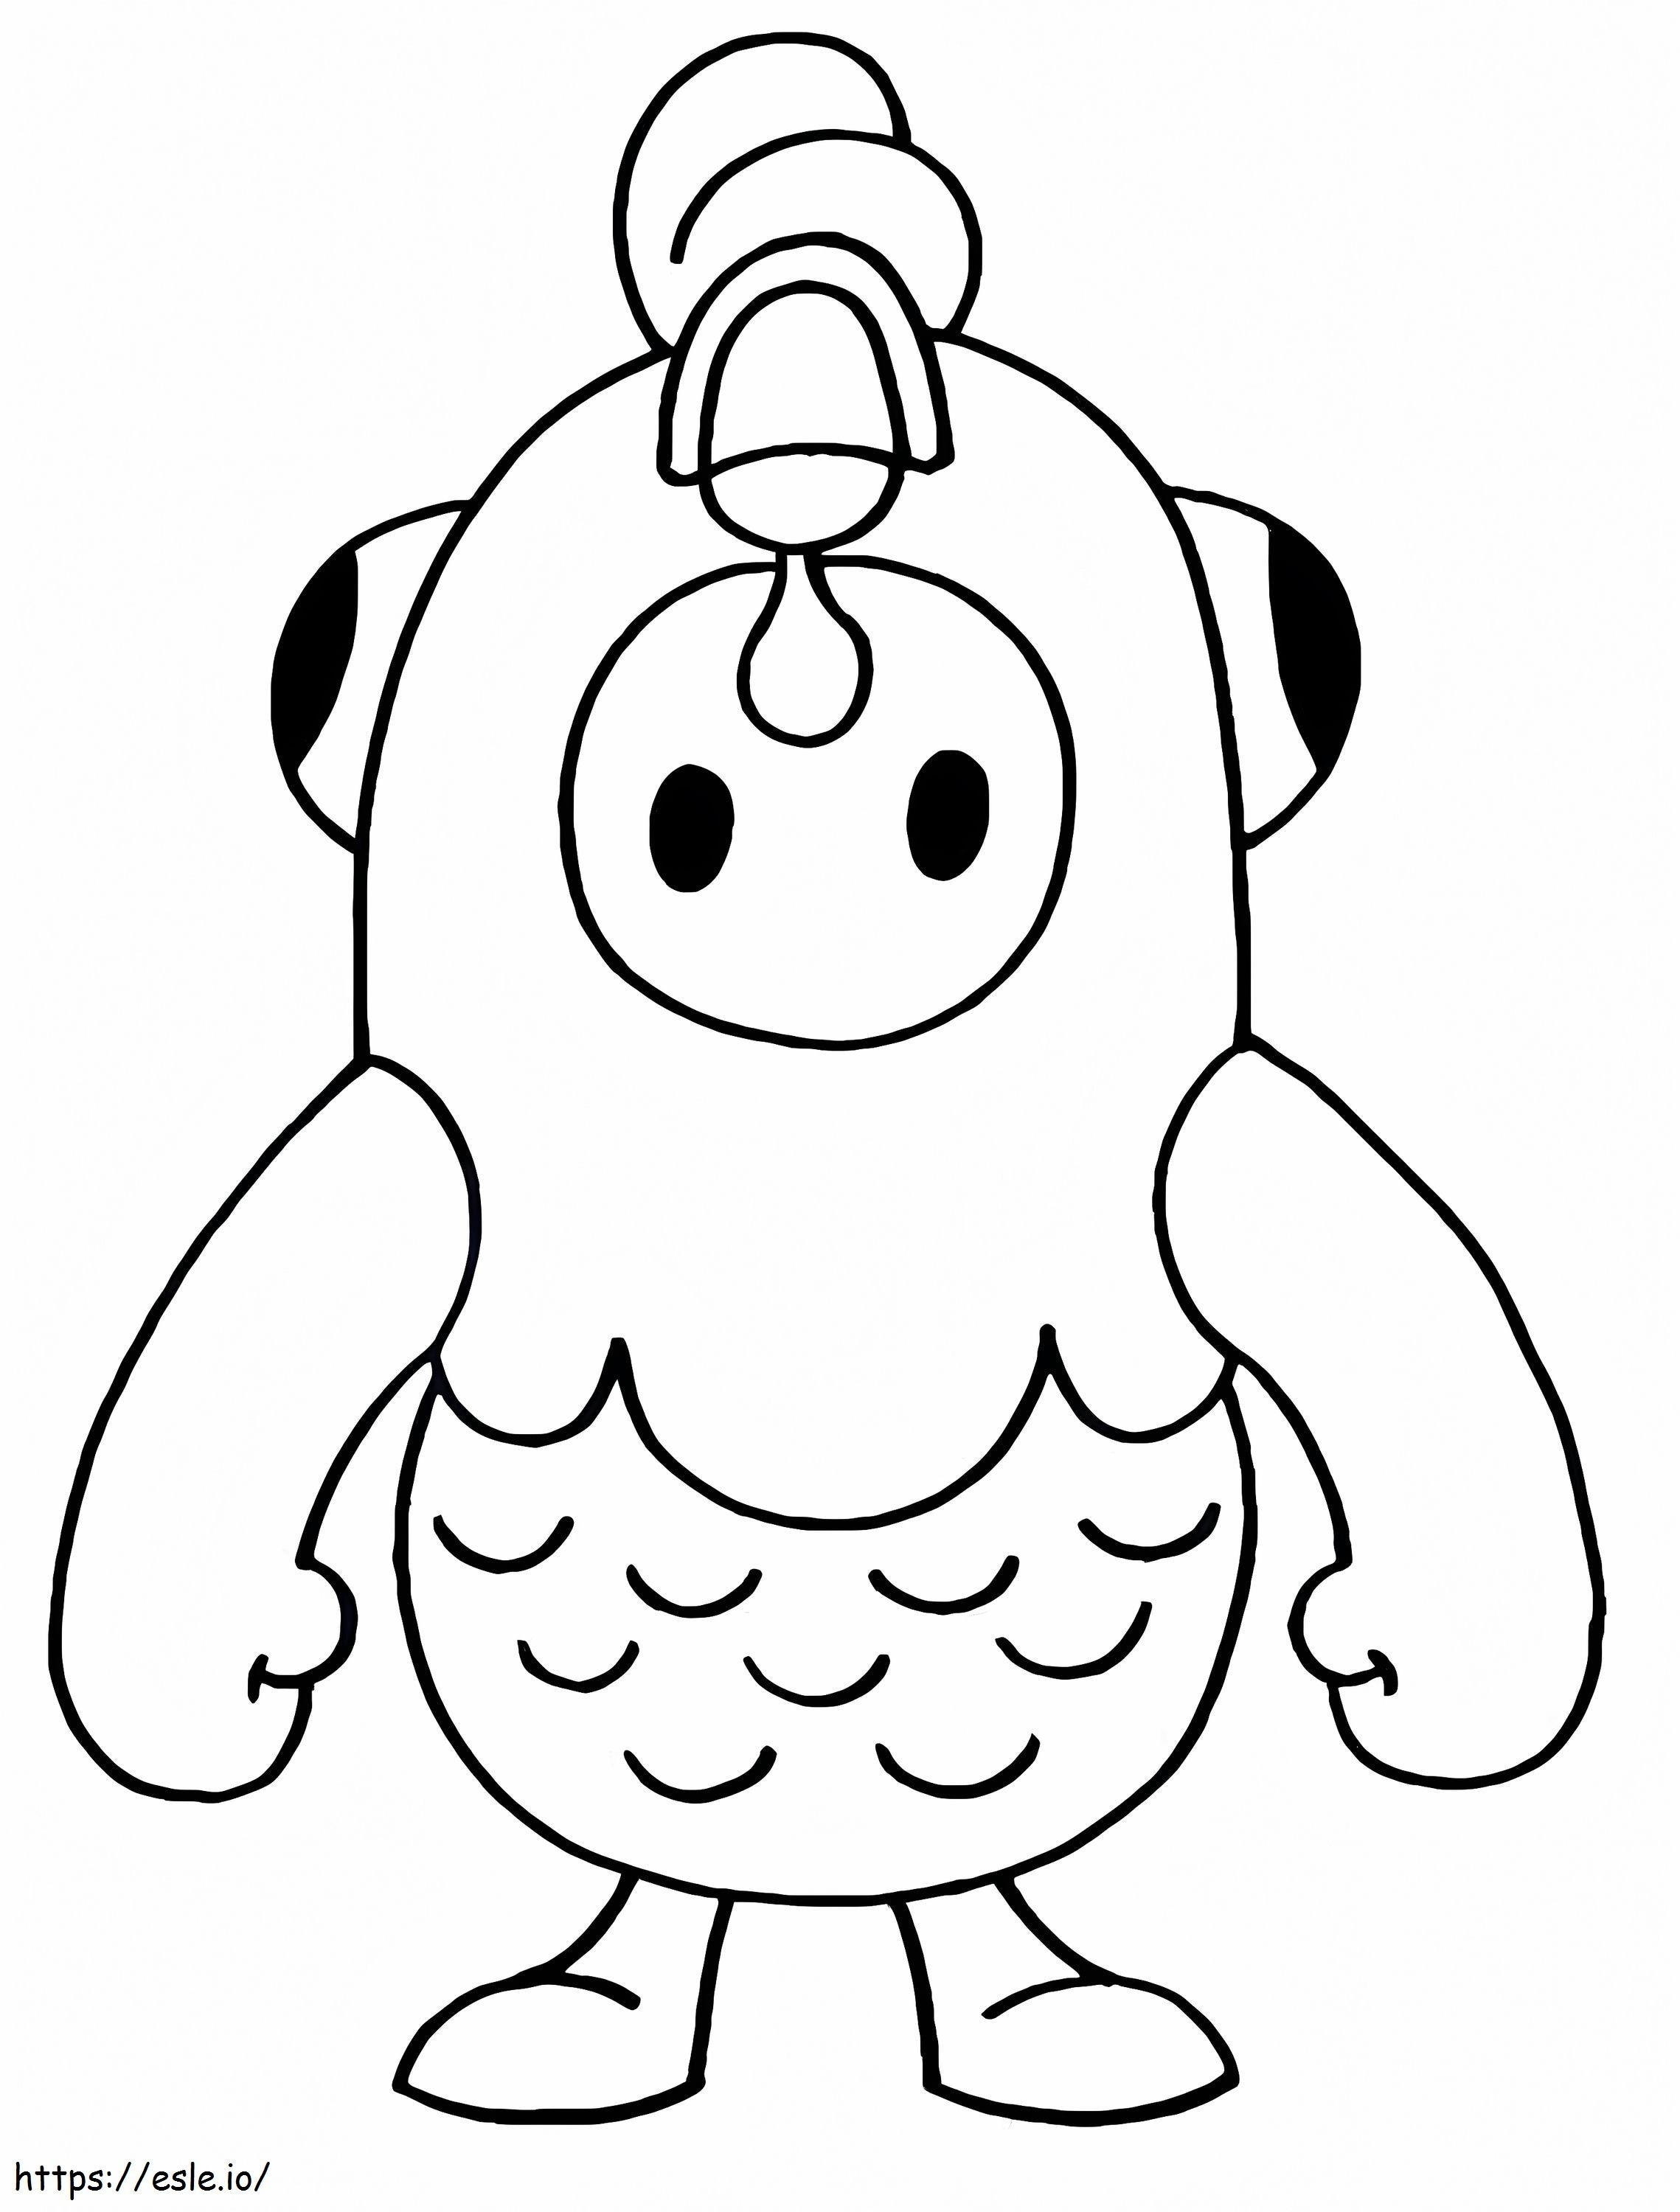 Chicken Skin Fall Guys coloring page